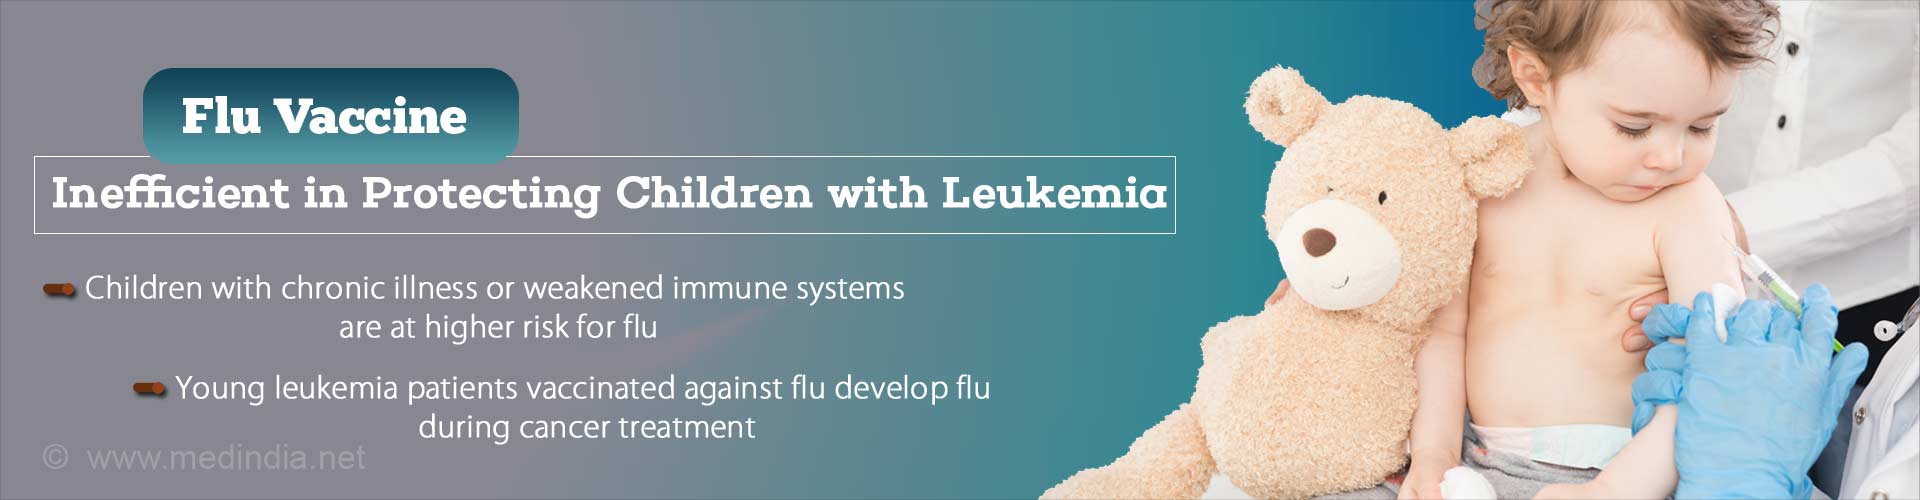 Flu vaccine inefficient in protecting children with leukemia
- children with chronic illness or weakened immune systems are at higher risk for flu
- Young leukemia patients vaccinated against flu develop flu during cancer treatment